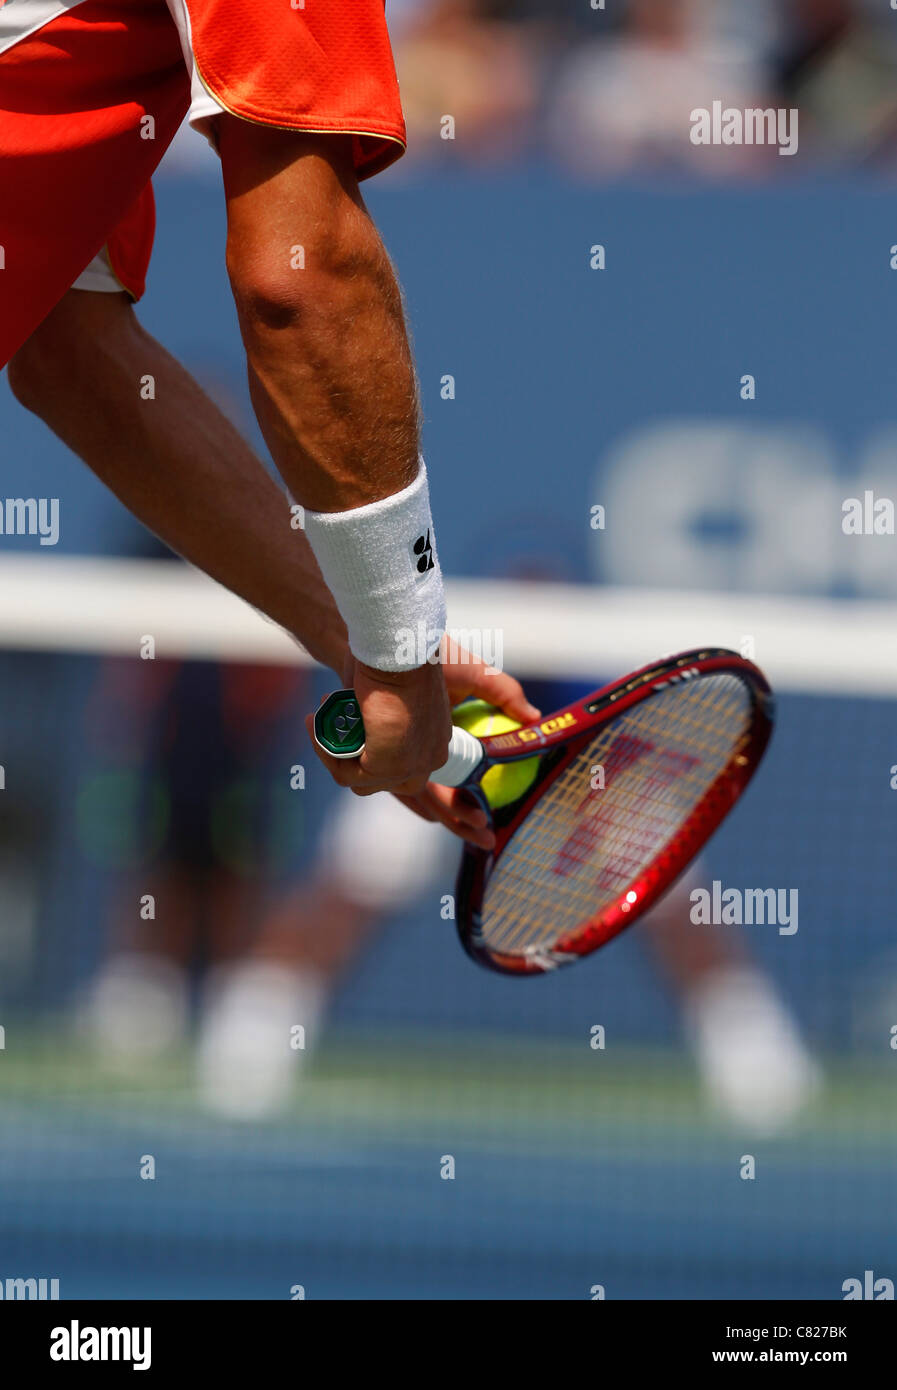 Tennis player about to serve at the U.S. Open 2011. Stock Photo